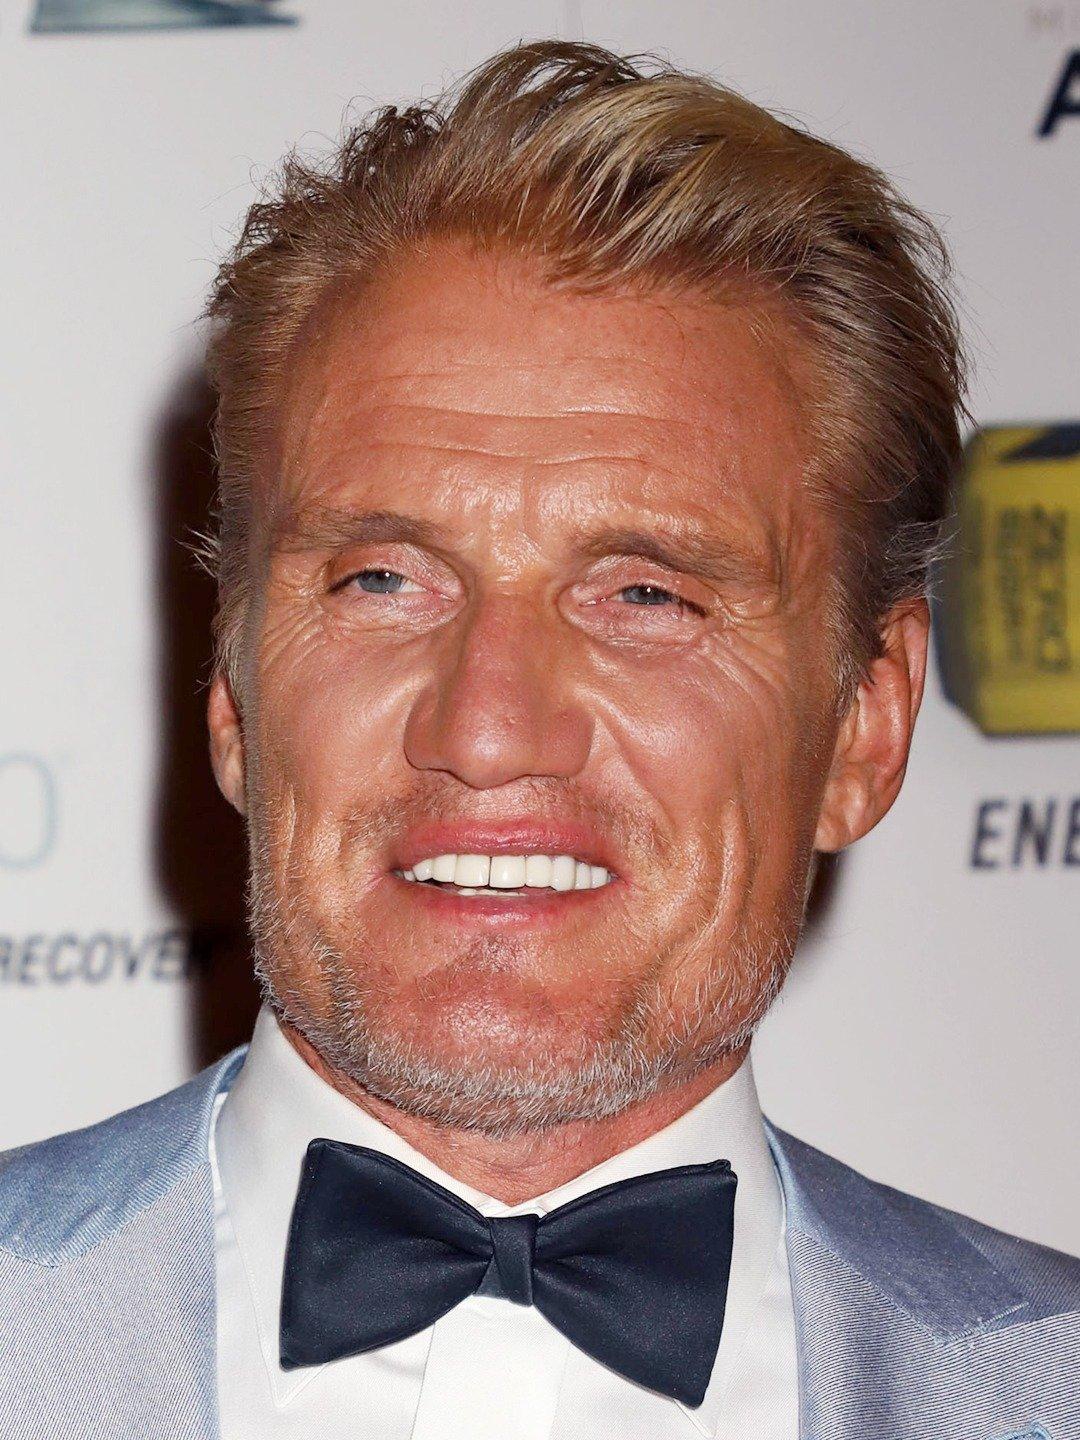 athlete triumphant Insulate Dolph Lundgren Movies & TV Shows | The Roku Channel | Roku